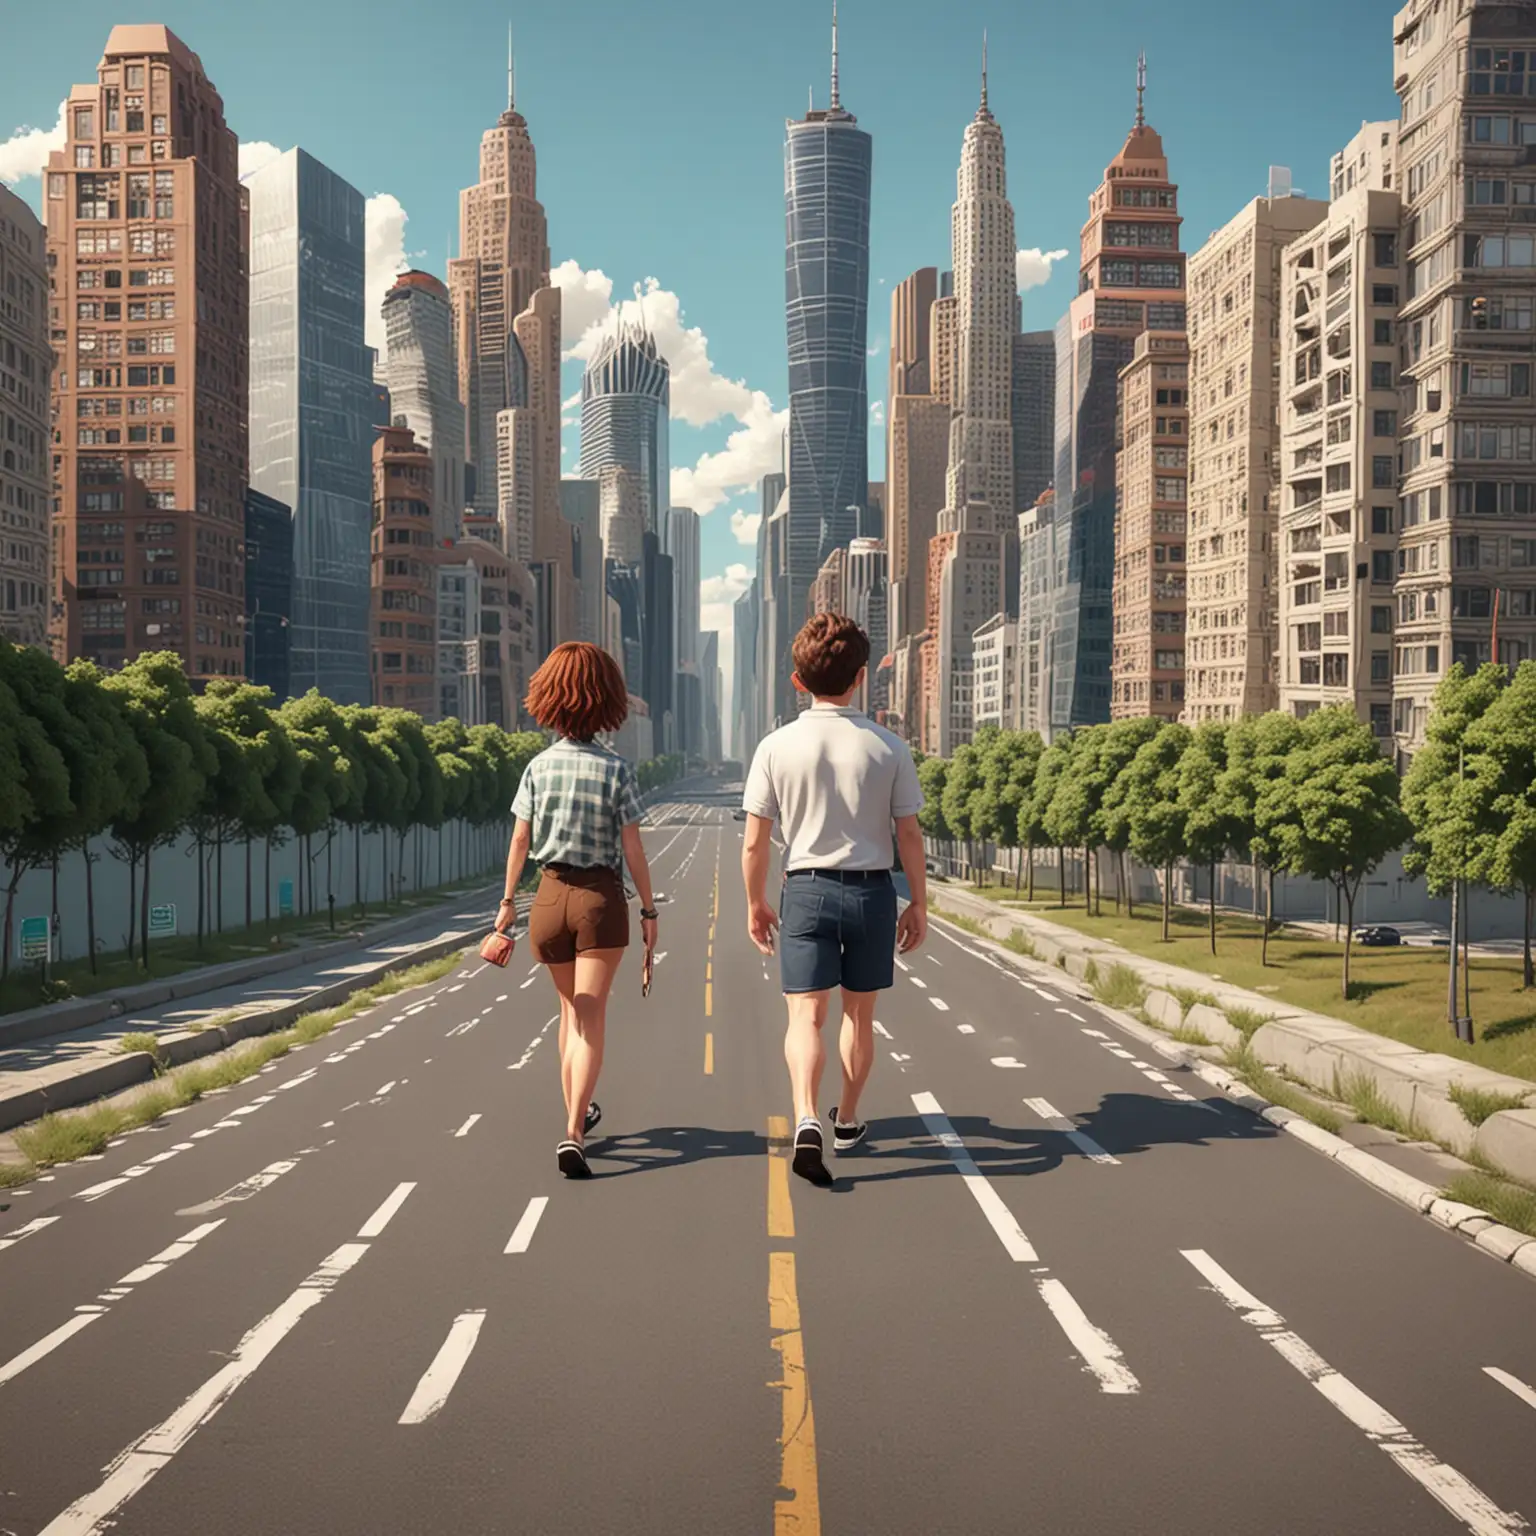 Cartoon-Friends-Walking-Along-a-City-Road-with-Skyscrapers-in-the-Background